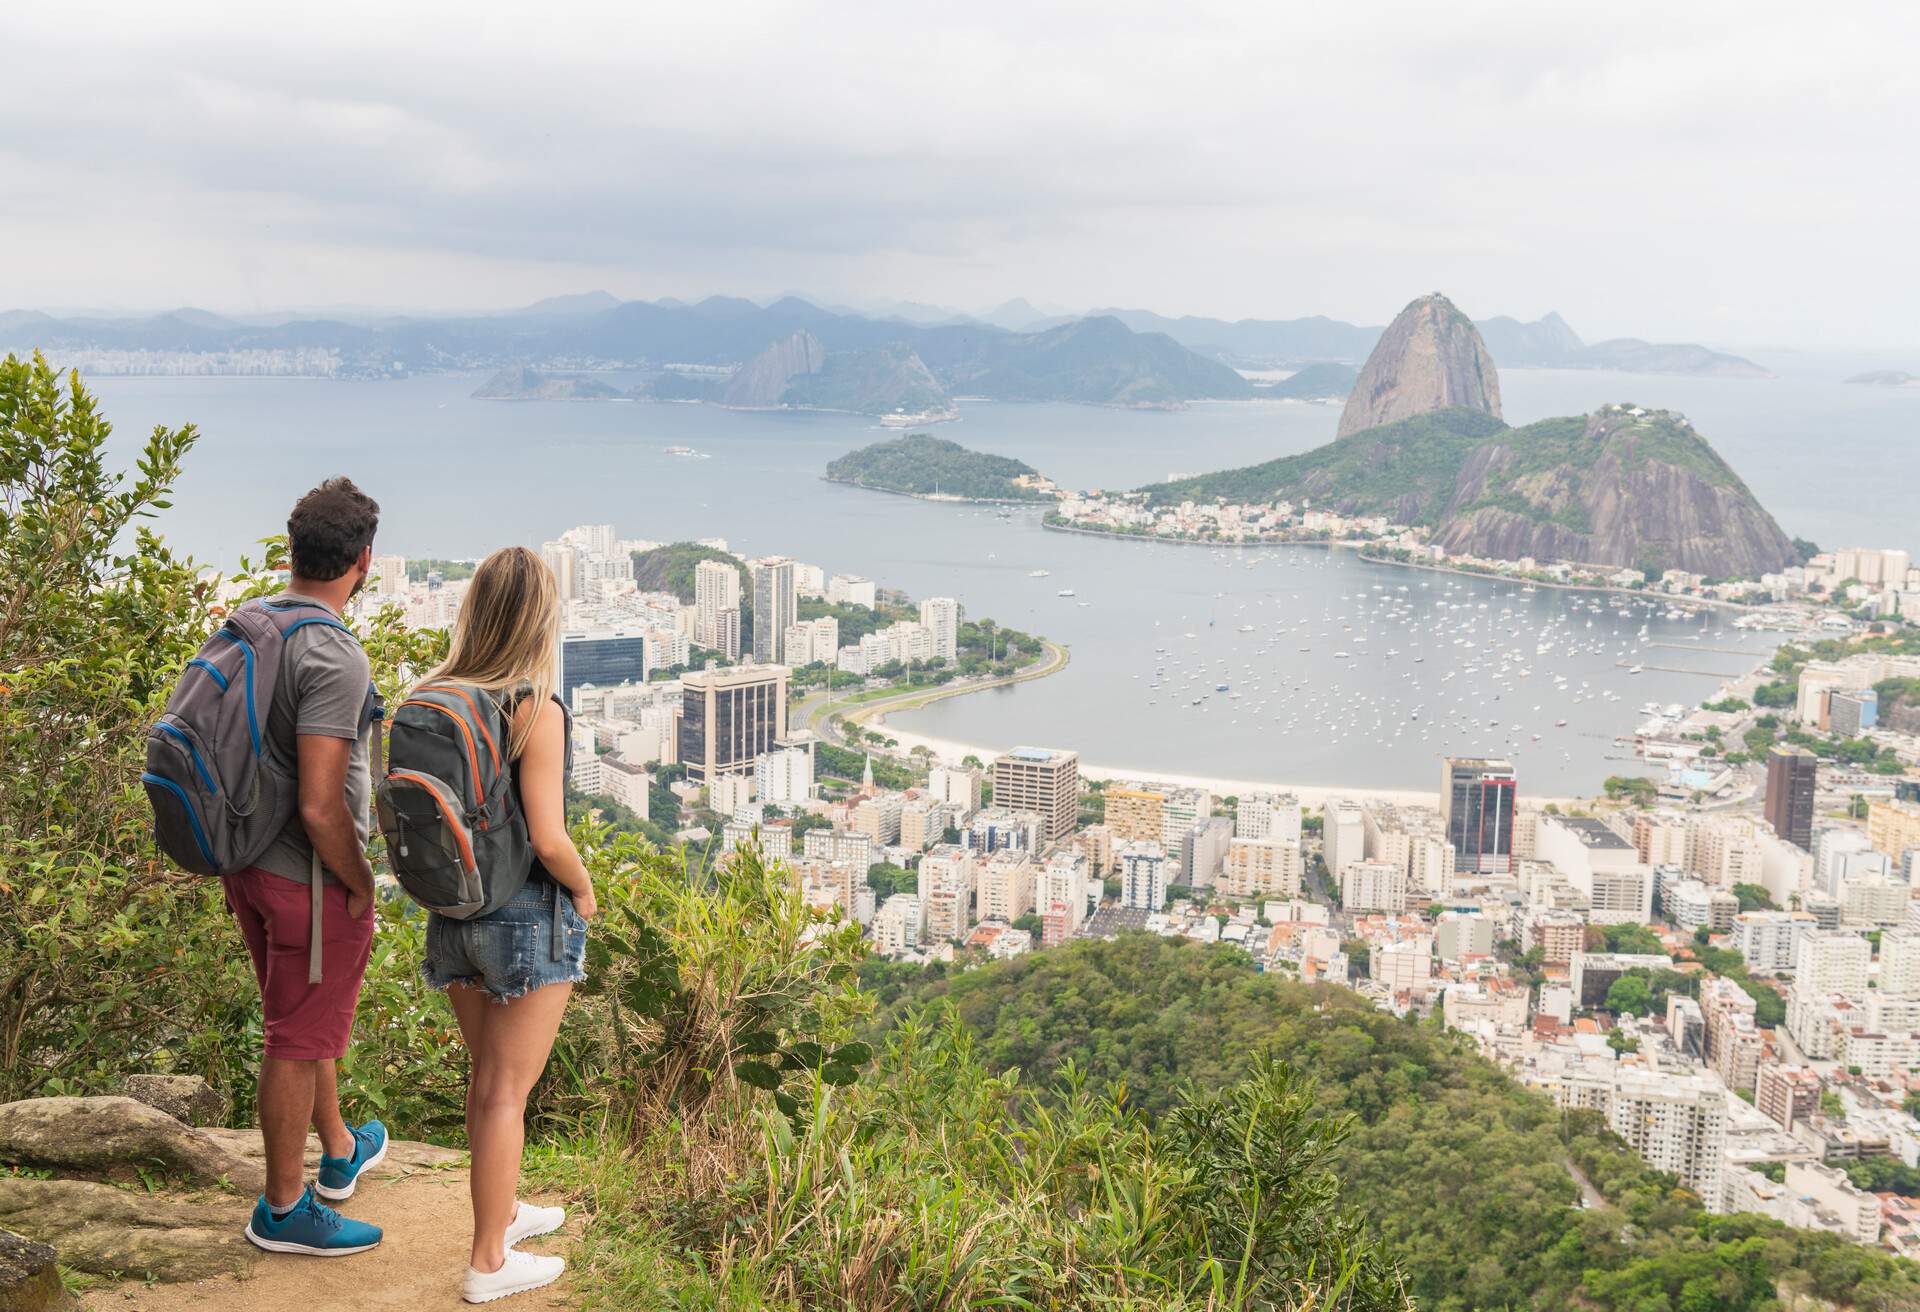 Backpacking tourists standing with views of Sugar Loaf Mountain in Rio de Janeiro